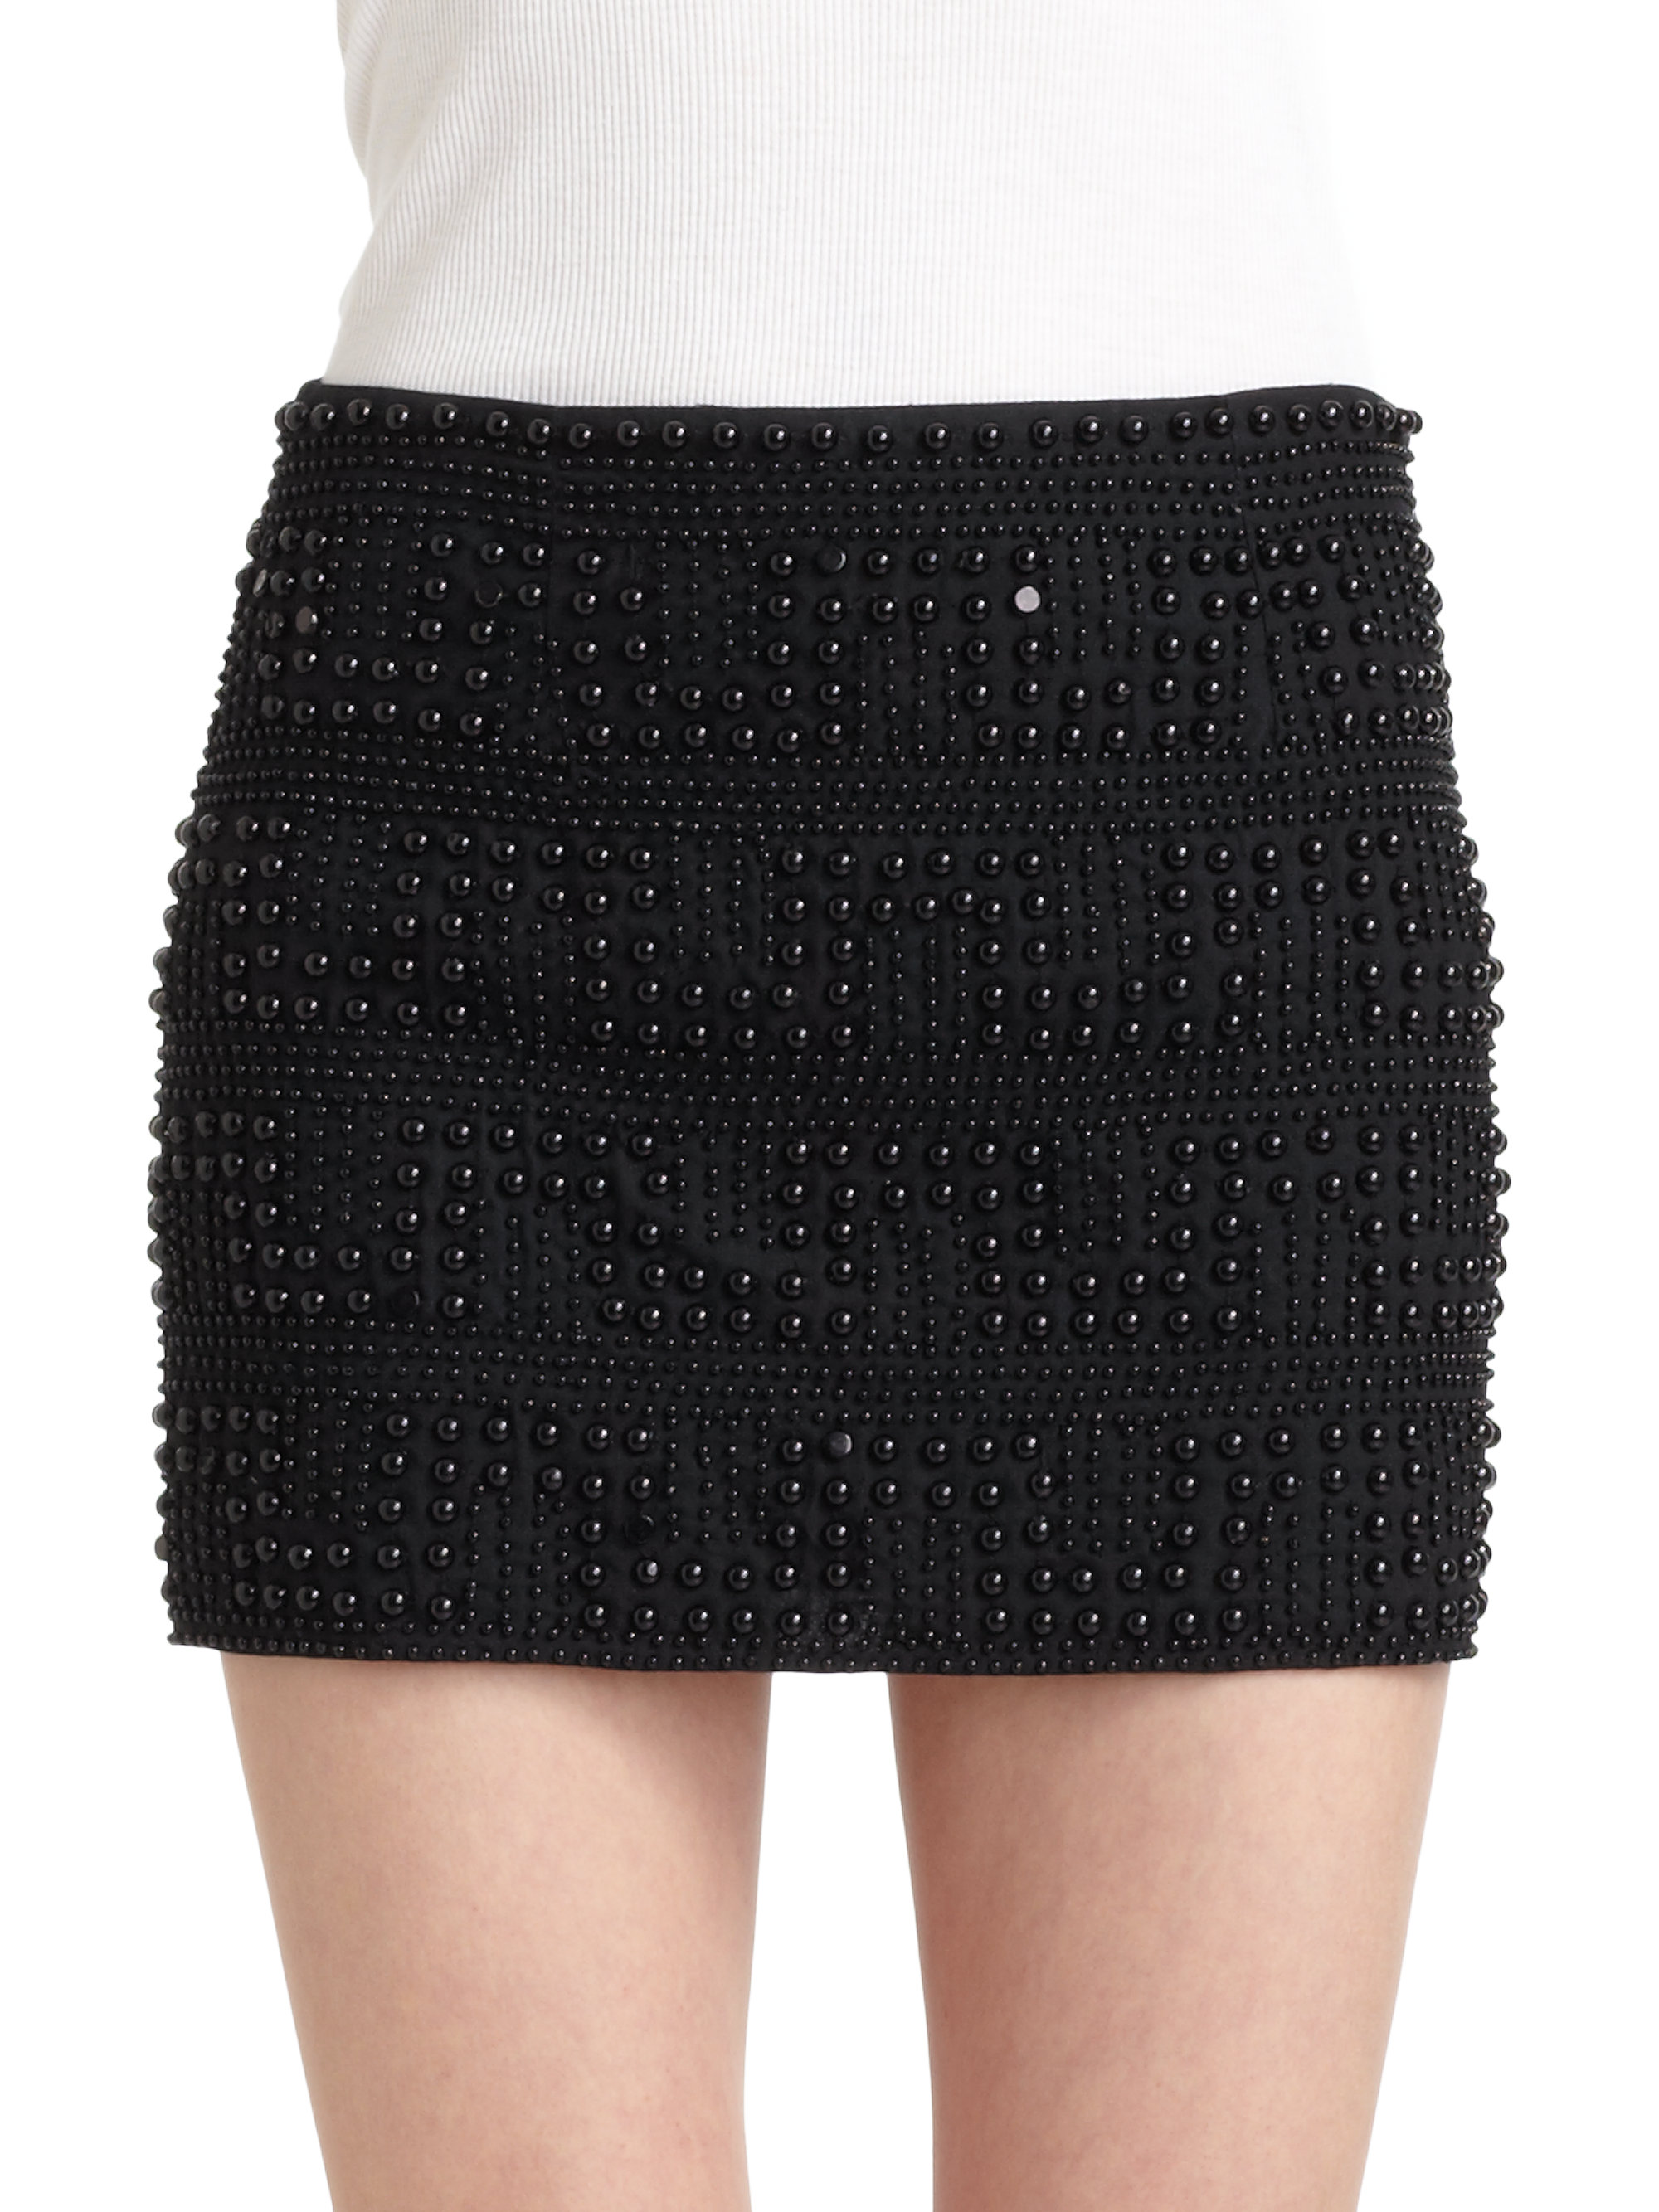 Gryphon Candy Dots Cotton Embellished Mini Skirt in Black | Lyst